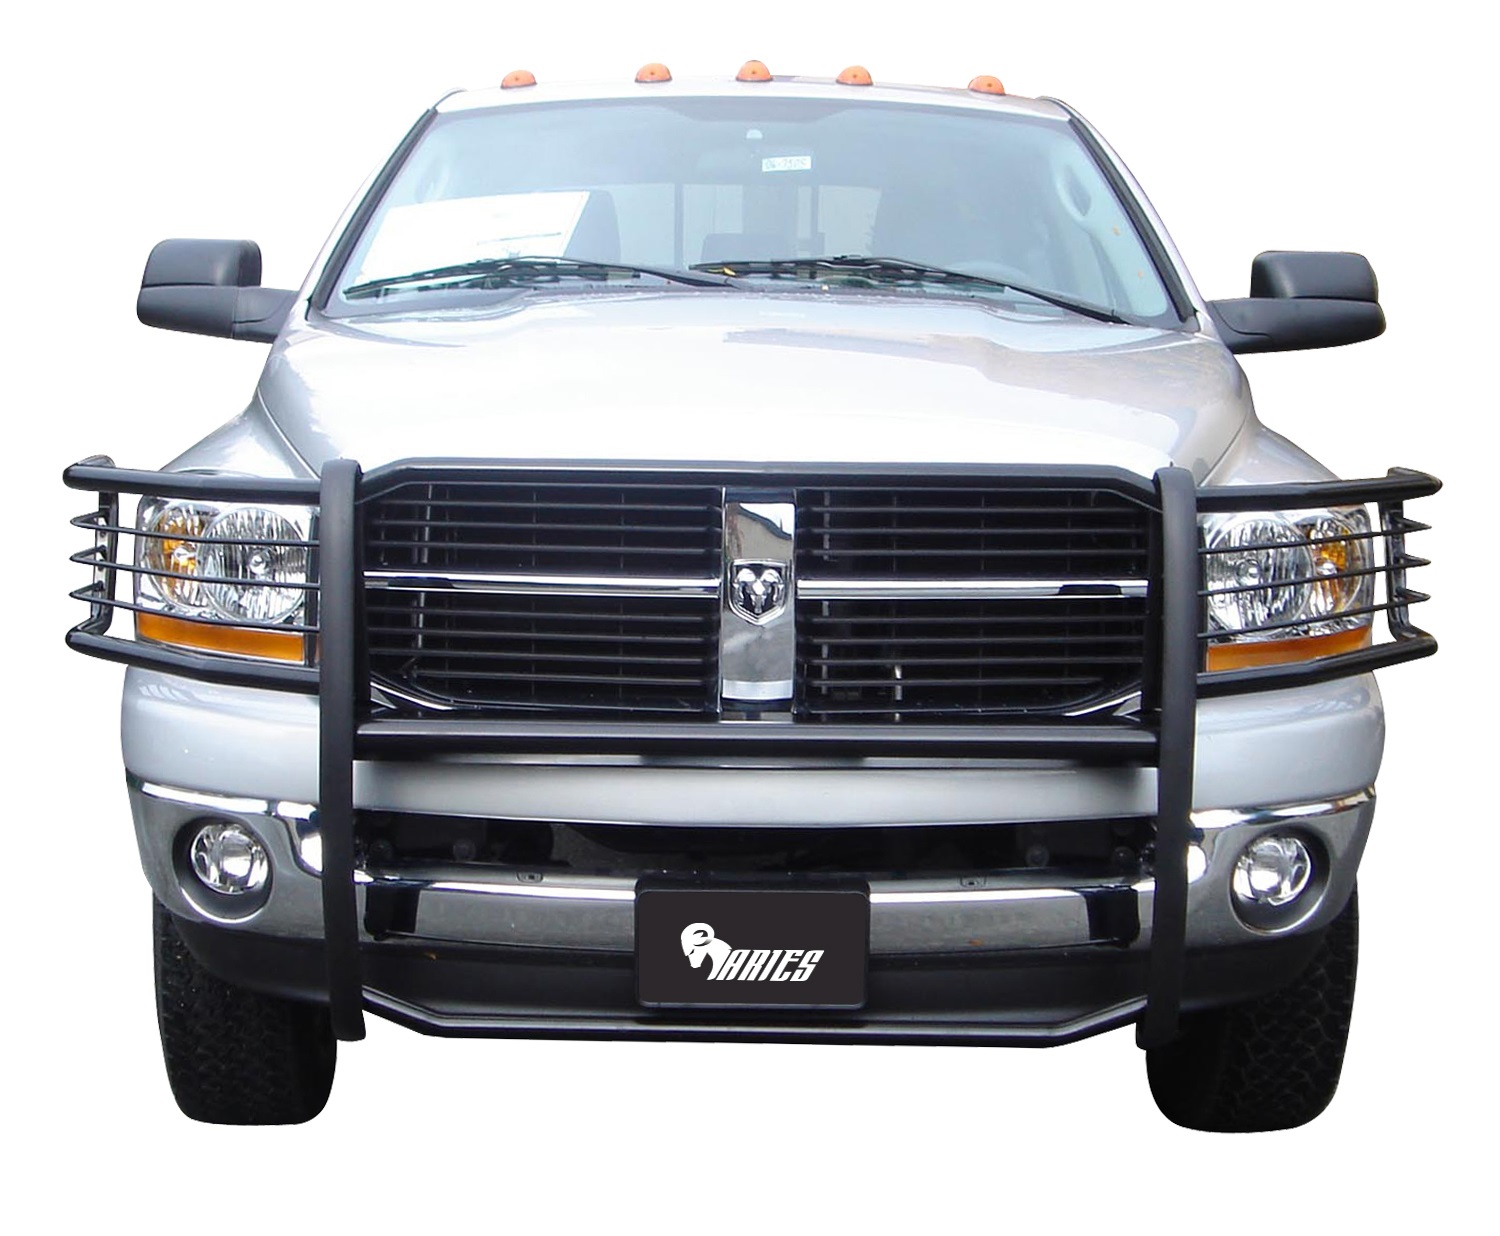 Aries Offroad Aries Offroad 5049 The Aries Bar; Grille/Brush Guard Fits Ram 2500 Ram 3500